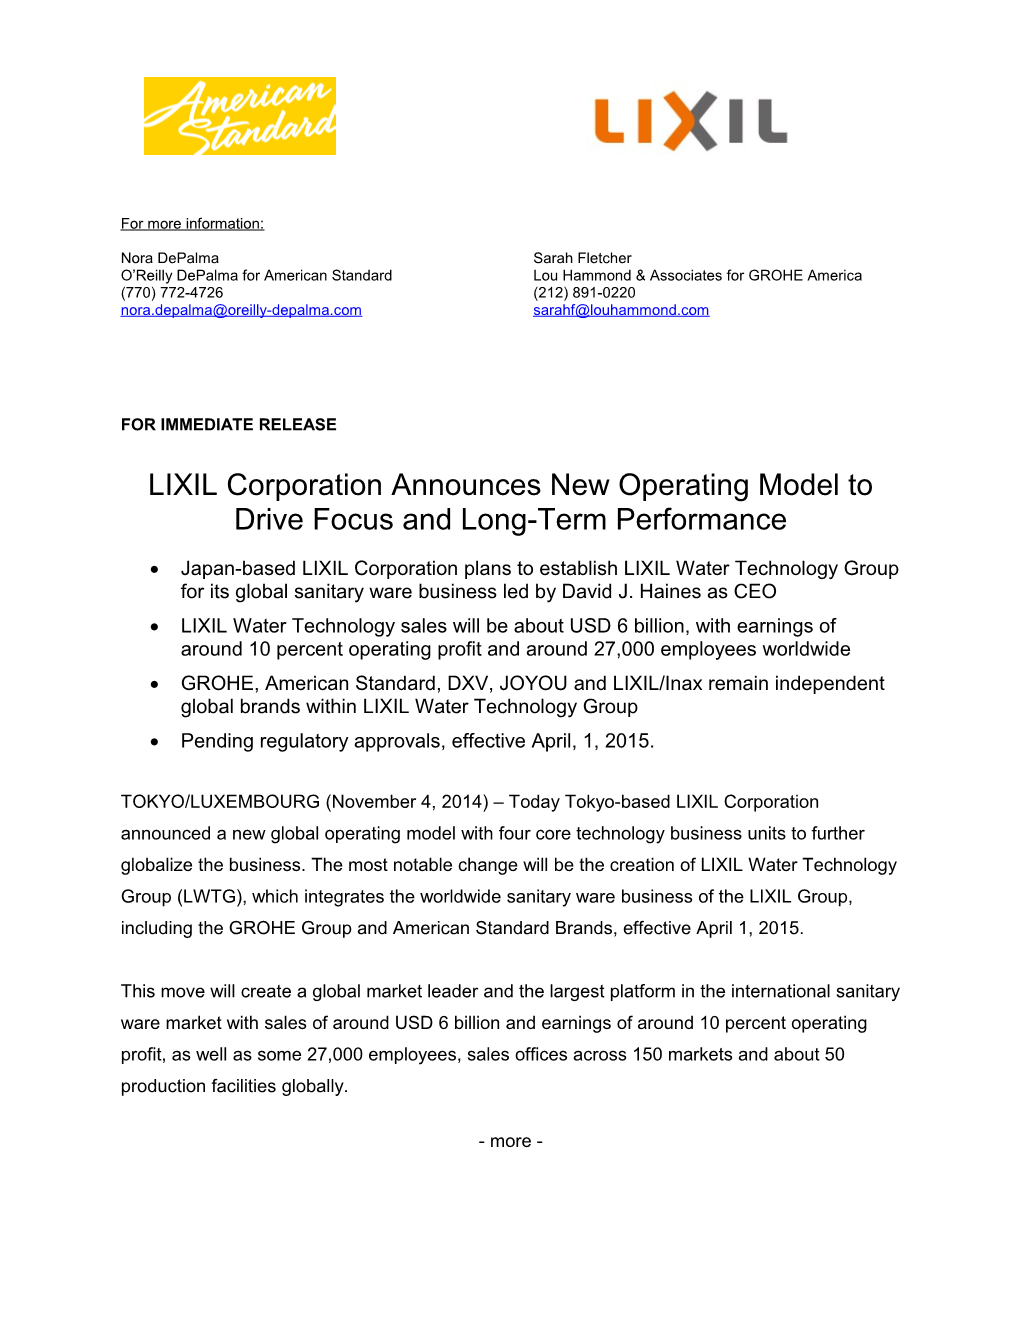 LIXIL Corporation Announces New Operating Model to Drive Focus and Long-Term Performance 1-1-1